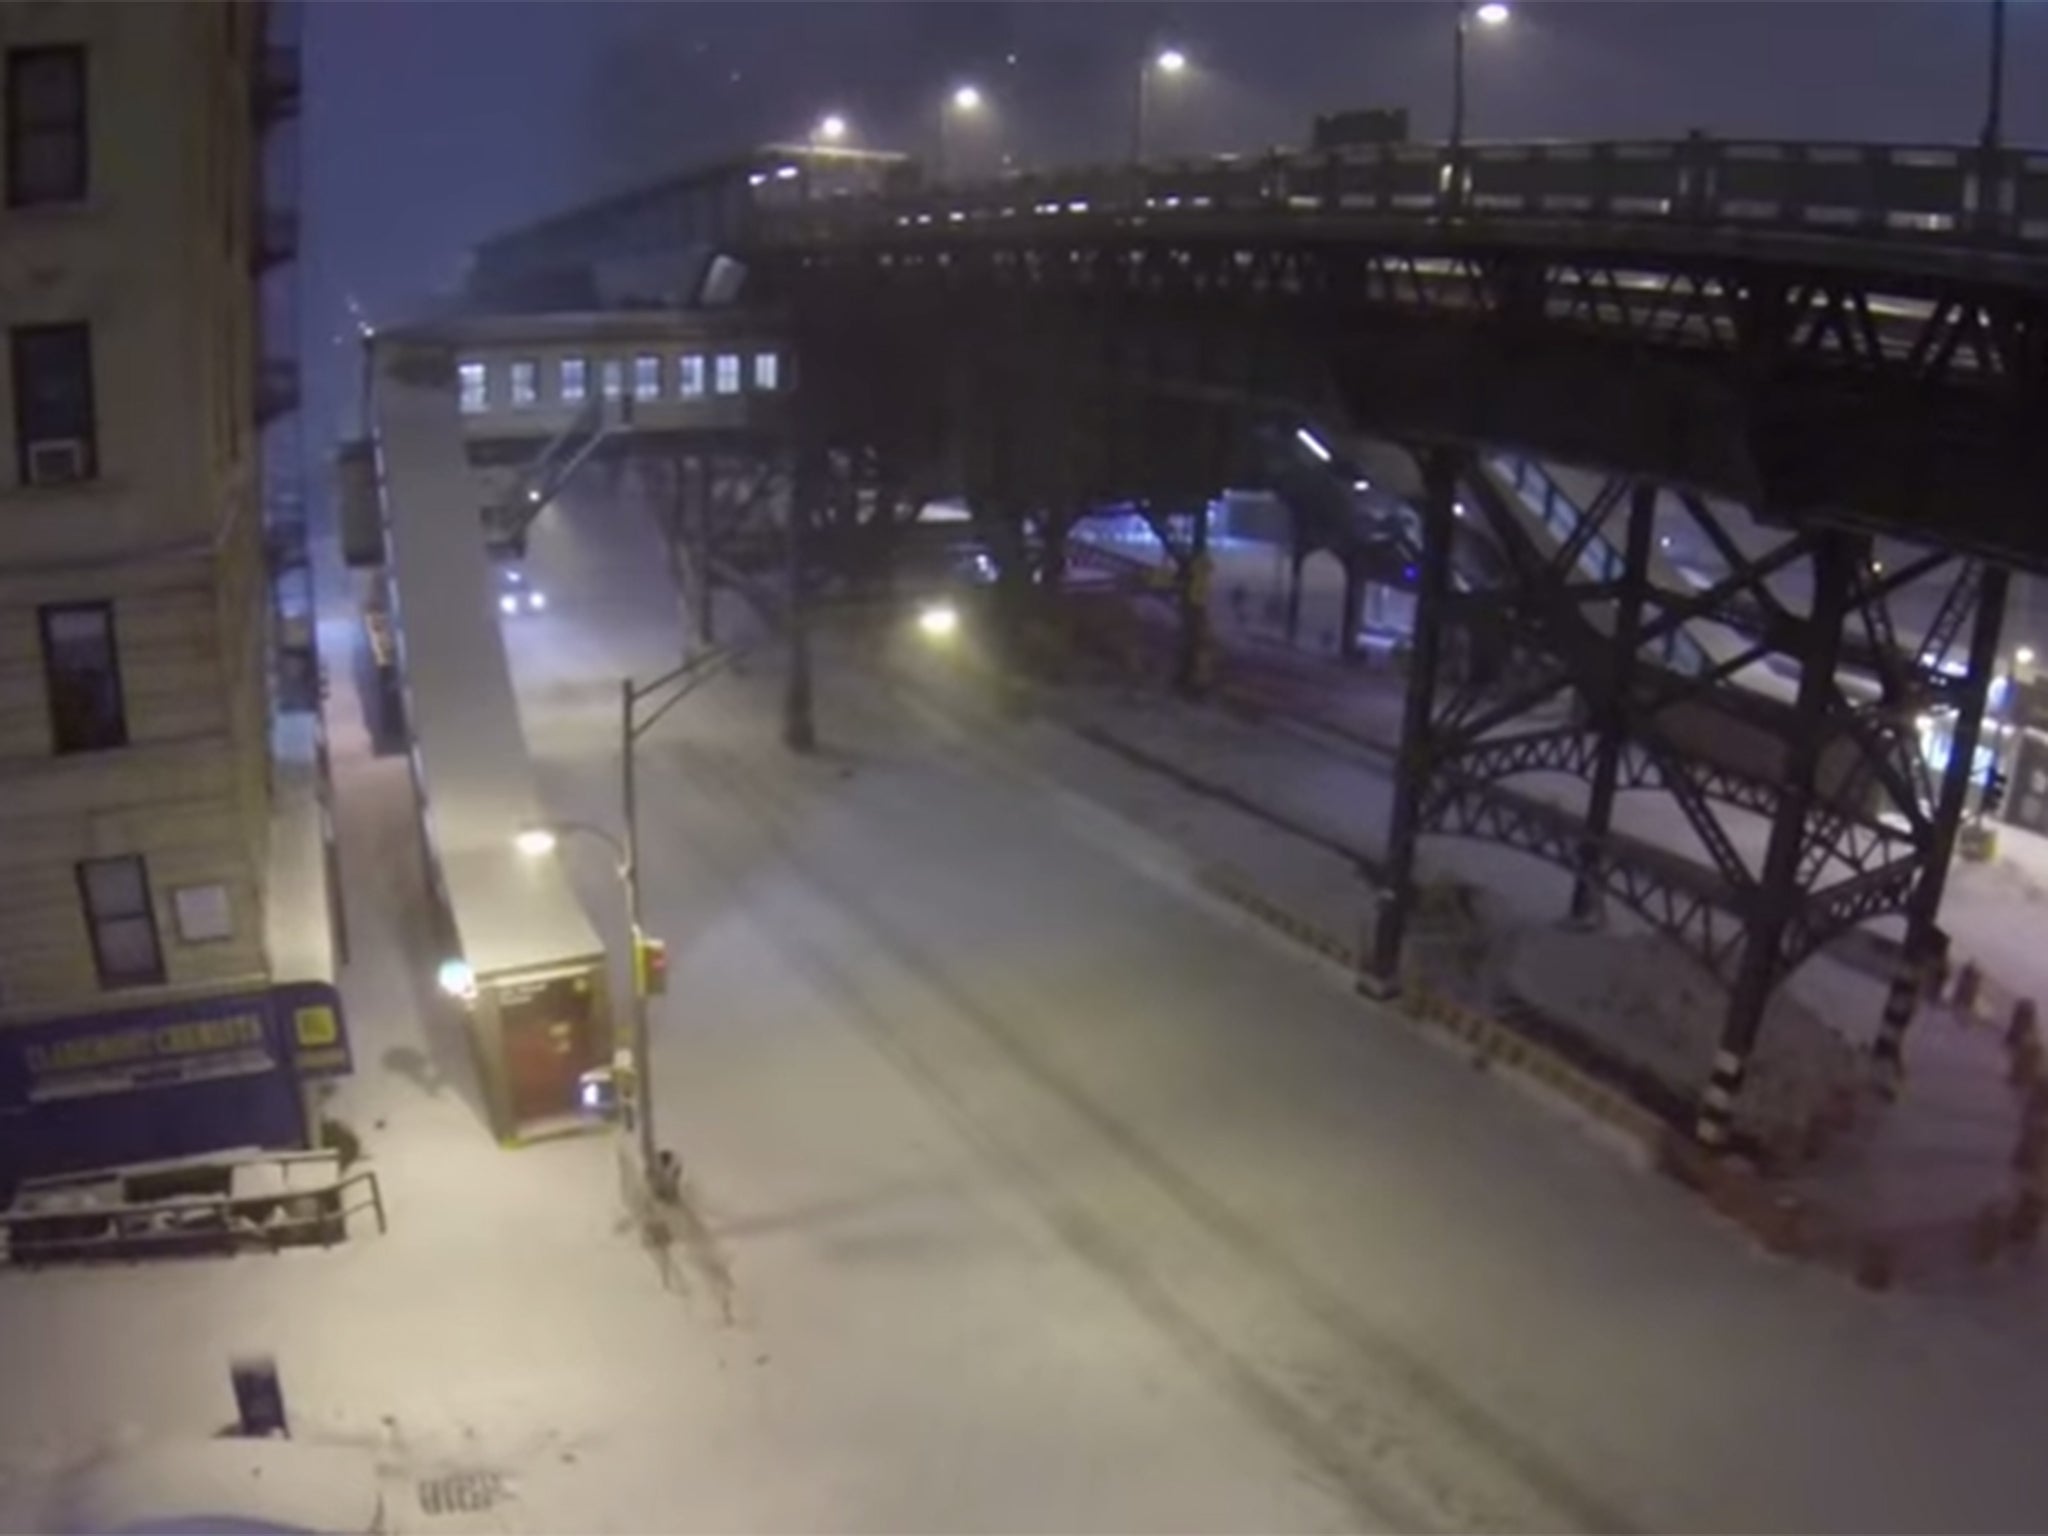 The city seems ghost-like as people stay indoors and out of the icy weather